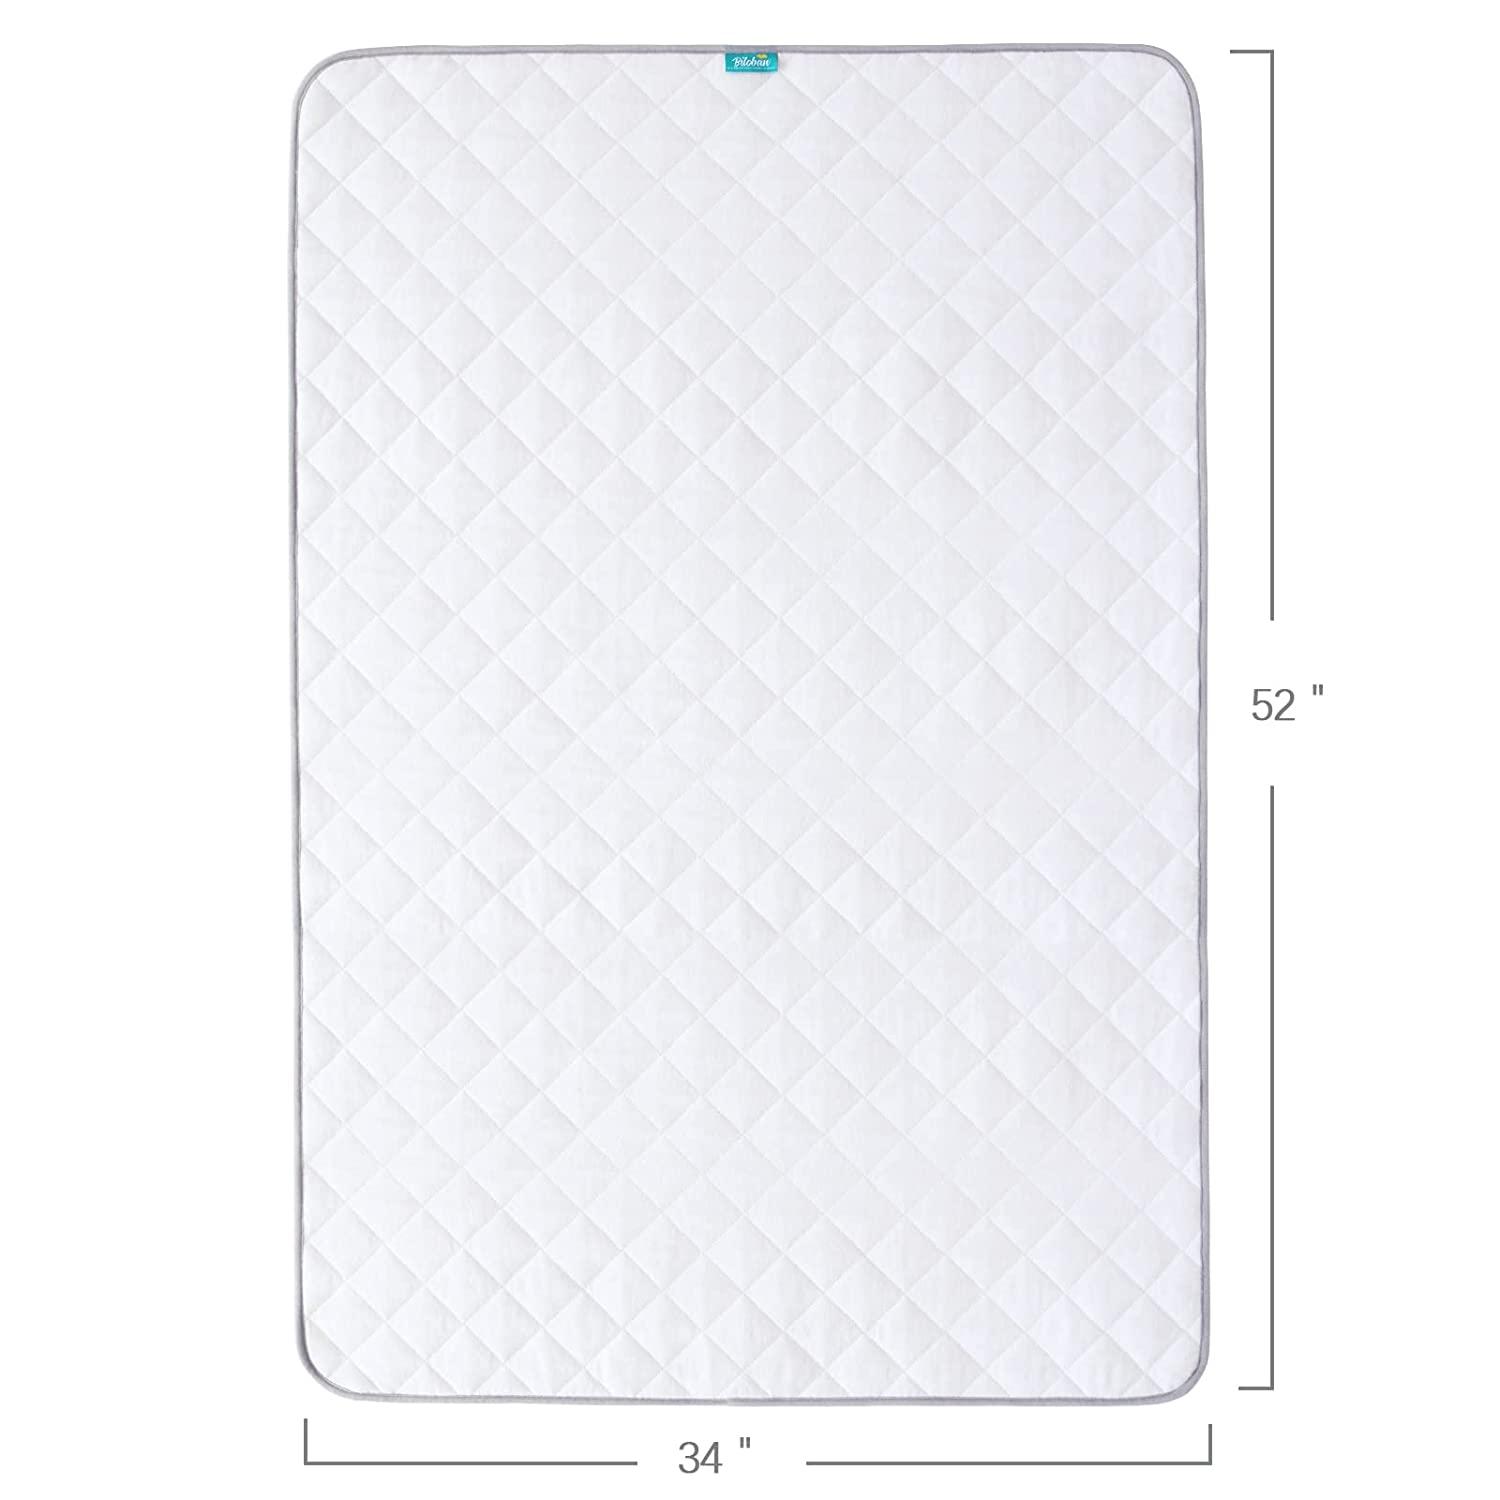 Hospital Bed Pads 34'' x 76'',Non-Slip Waterproof Sheet and Mattress Pad  Protector,Washable Bed Wetting Incontinence Cover, Pads for Kids, Elderly  Seniors, Single,Blue Blue 34x76 Inch (Pack of 1)